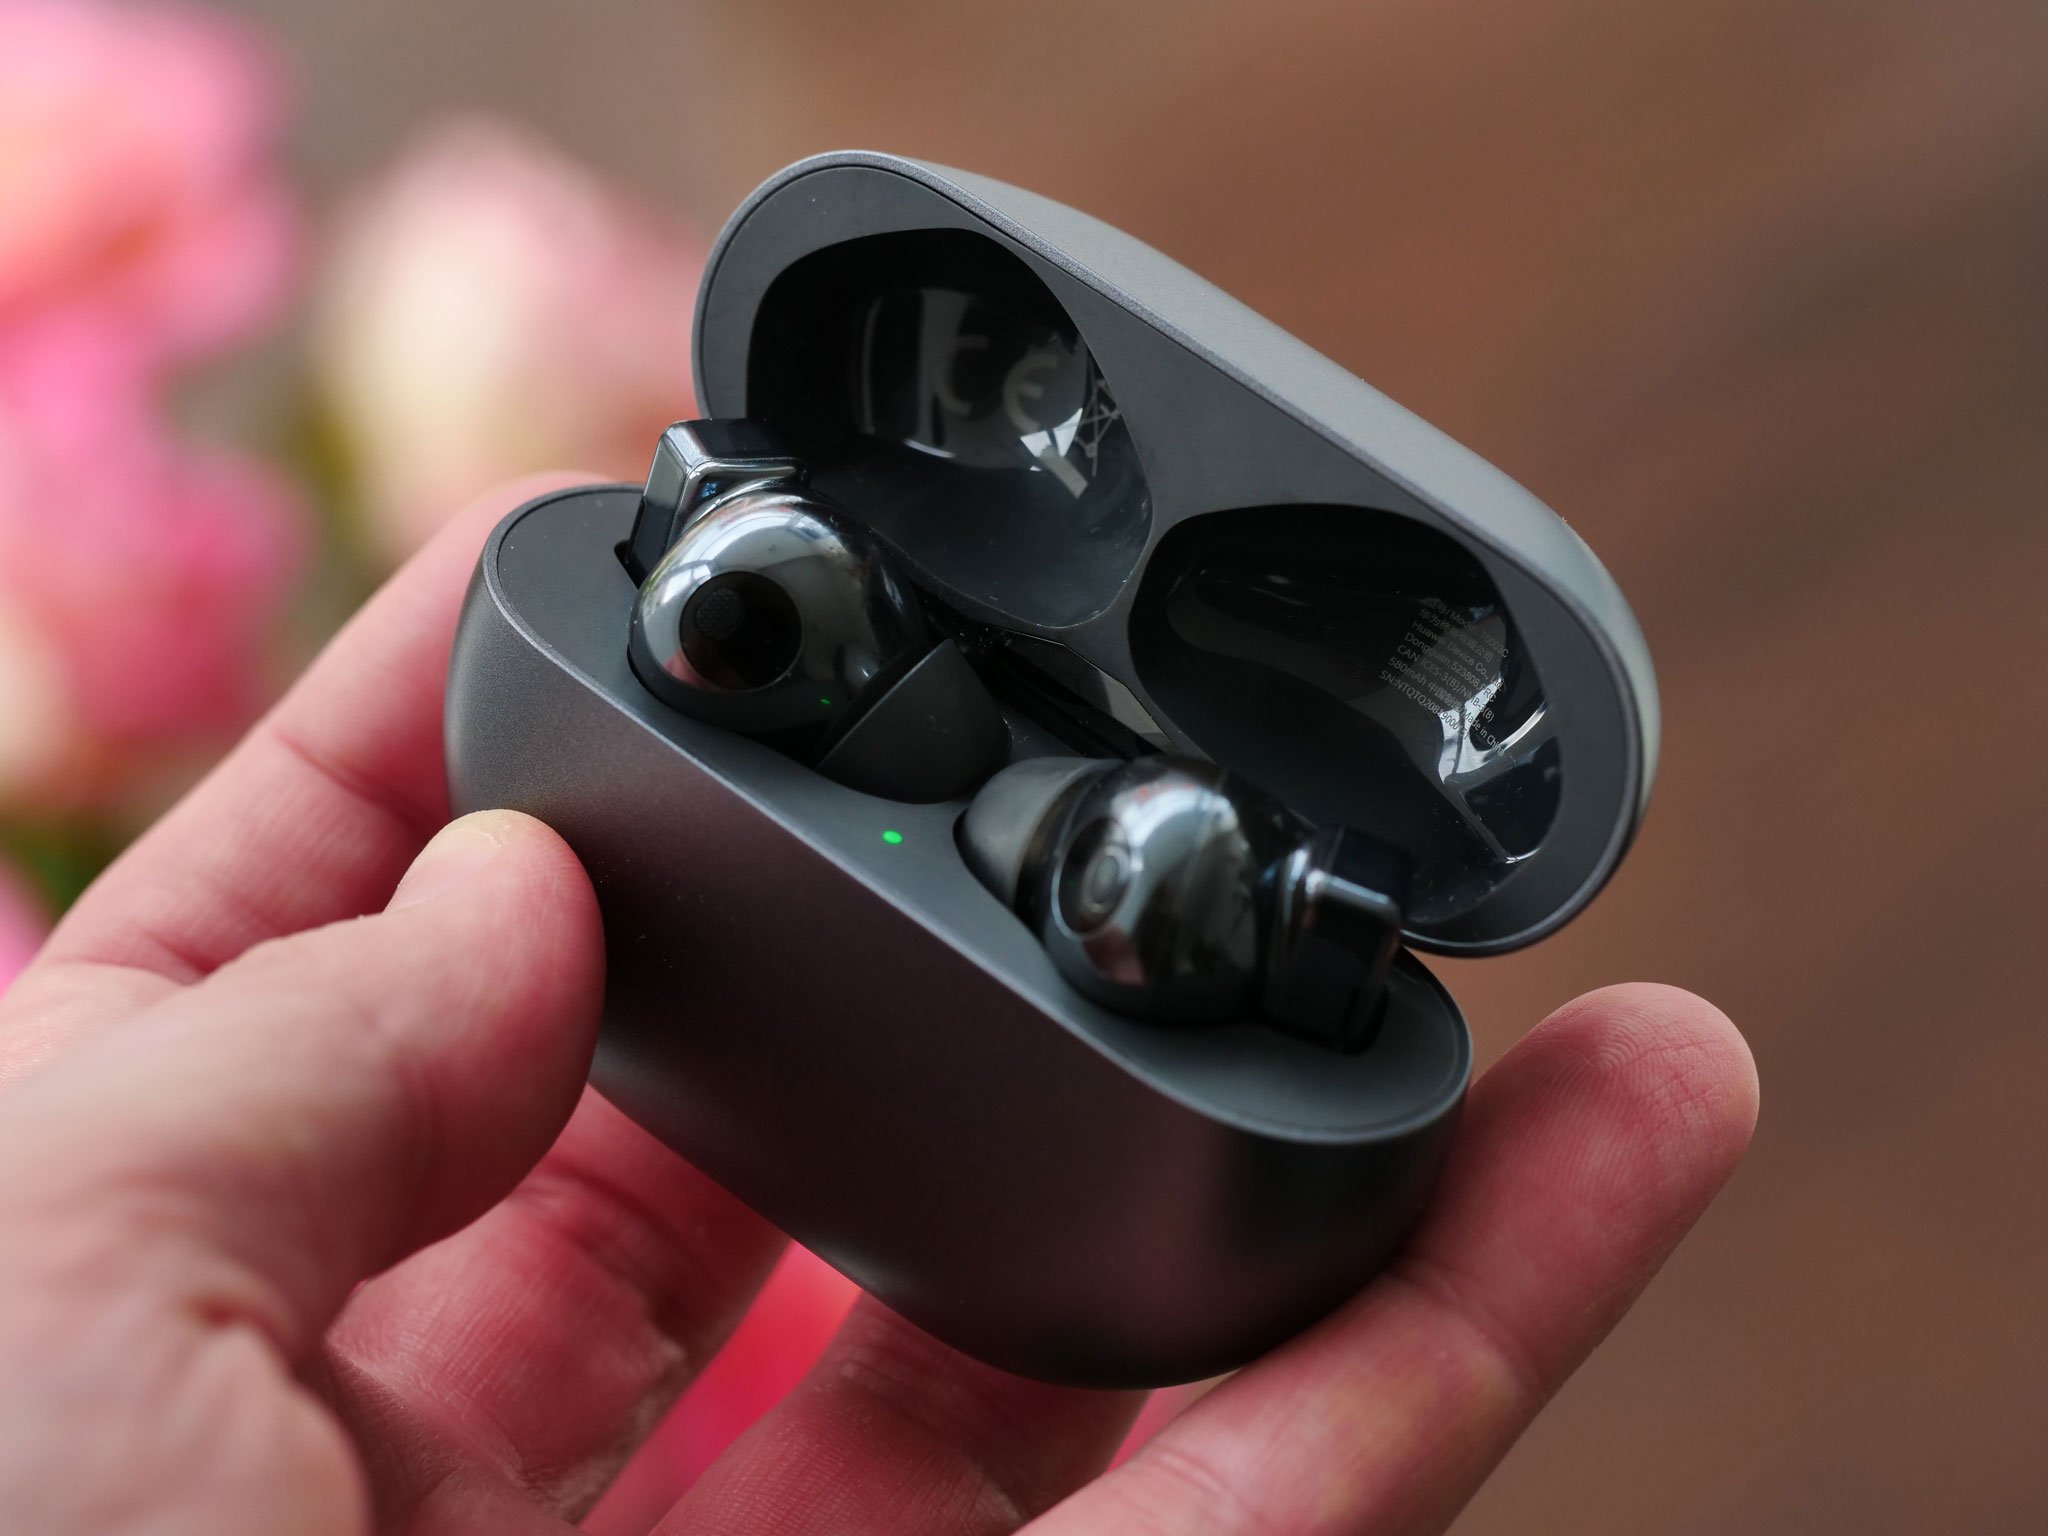 Huawei FreeBuds Pro 3 earbuds to launch later this year - Huawei Central